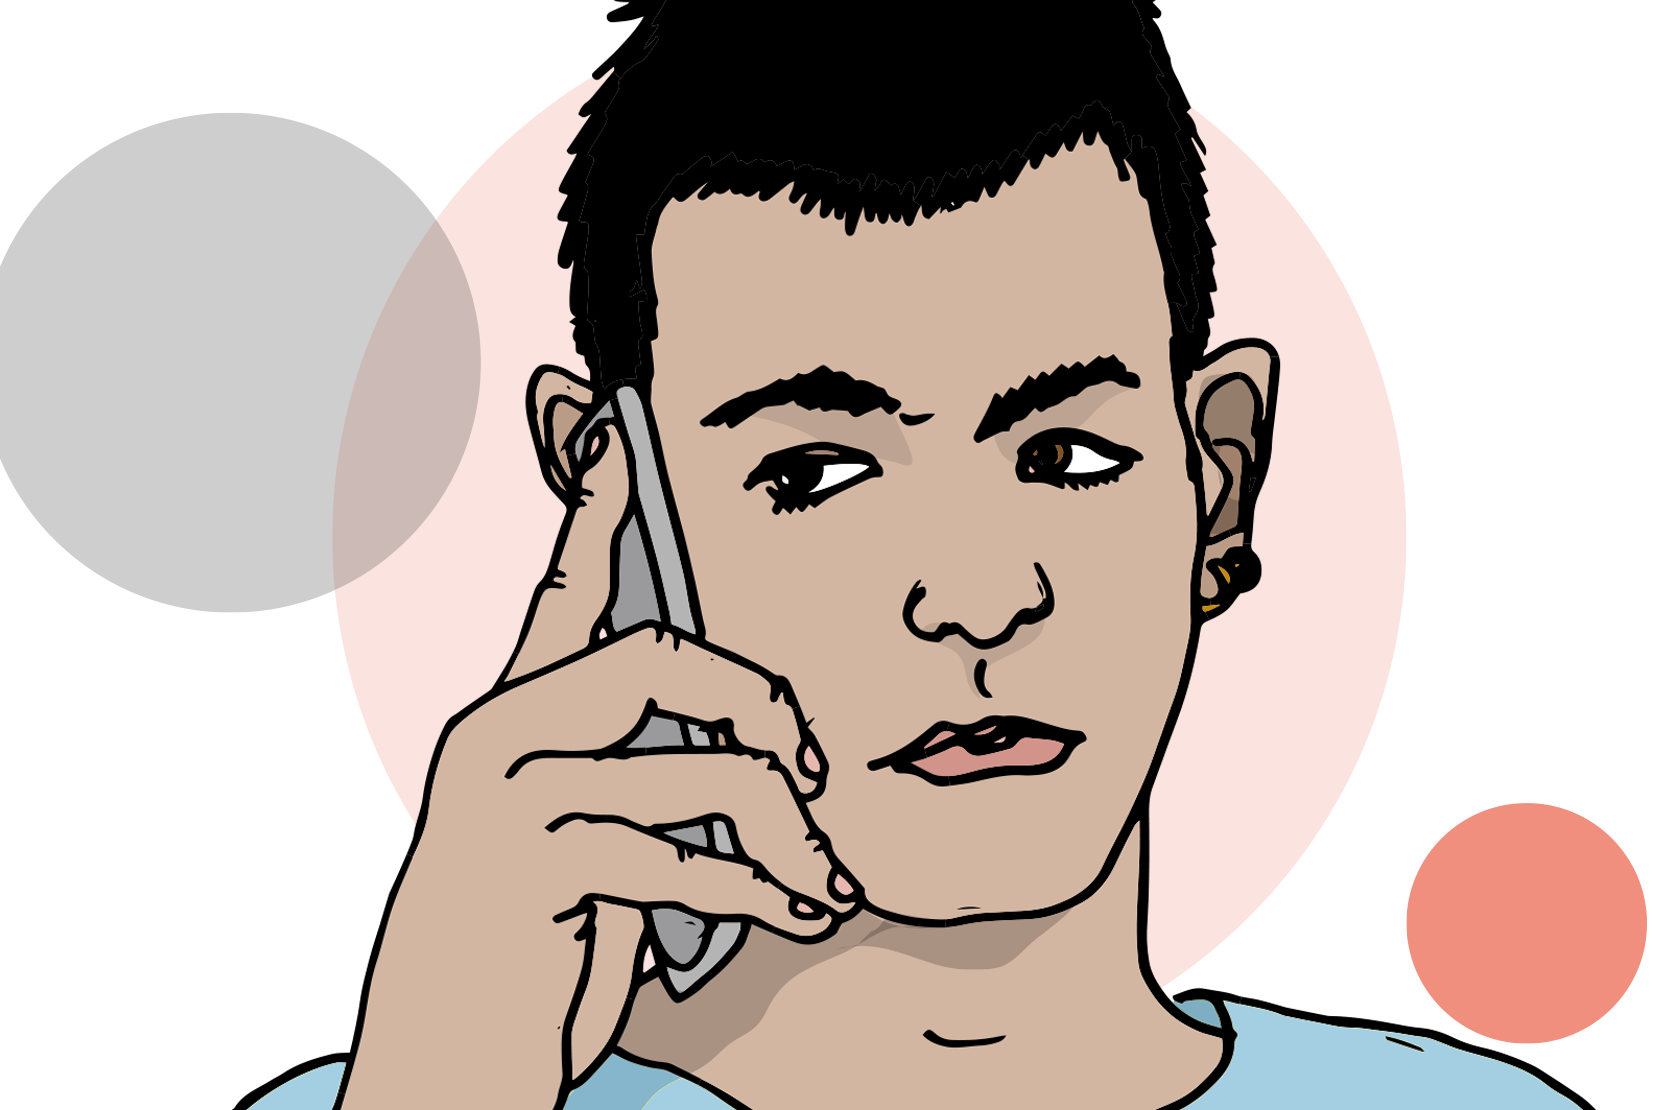 A person makes a mobile phone call.